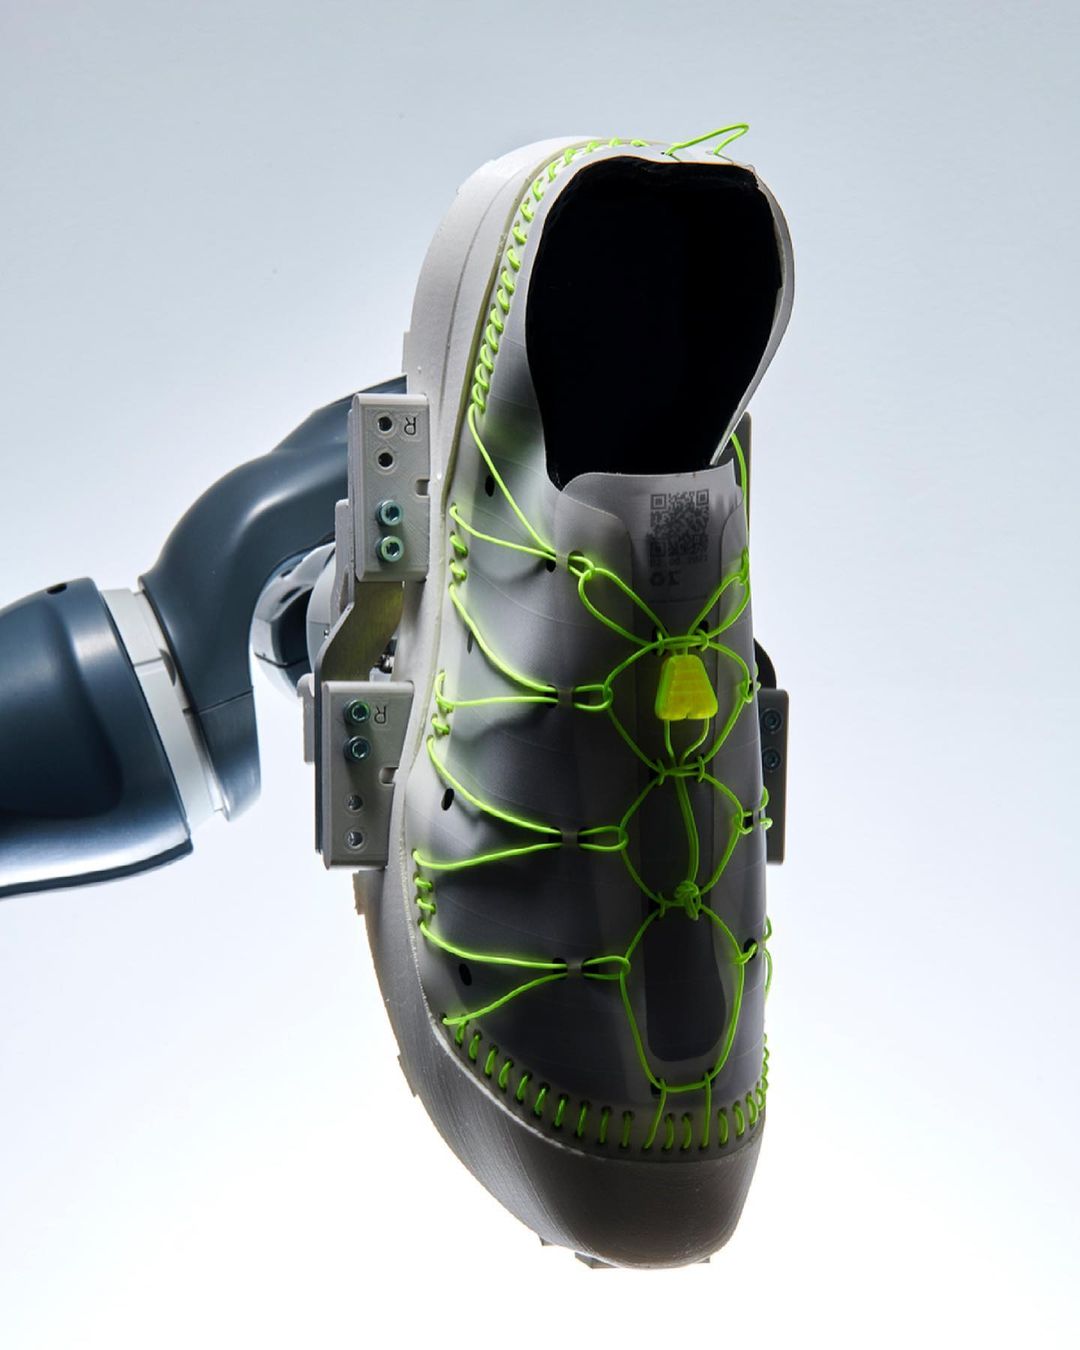 Maxwell Ashford's Robotically Recyclable Shoe